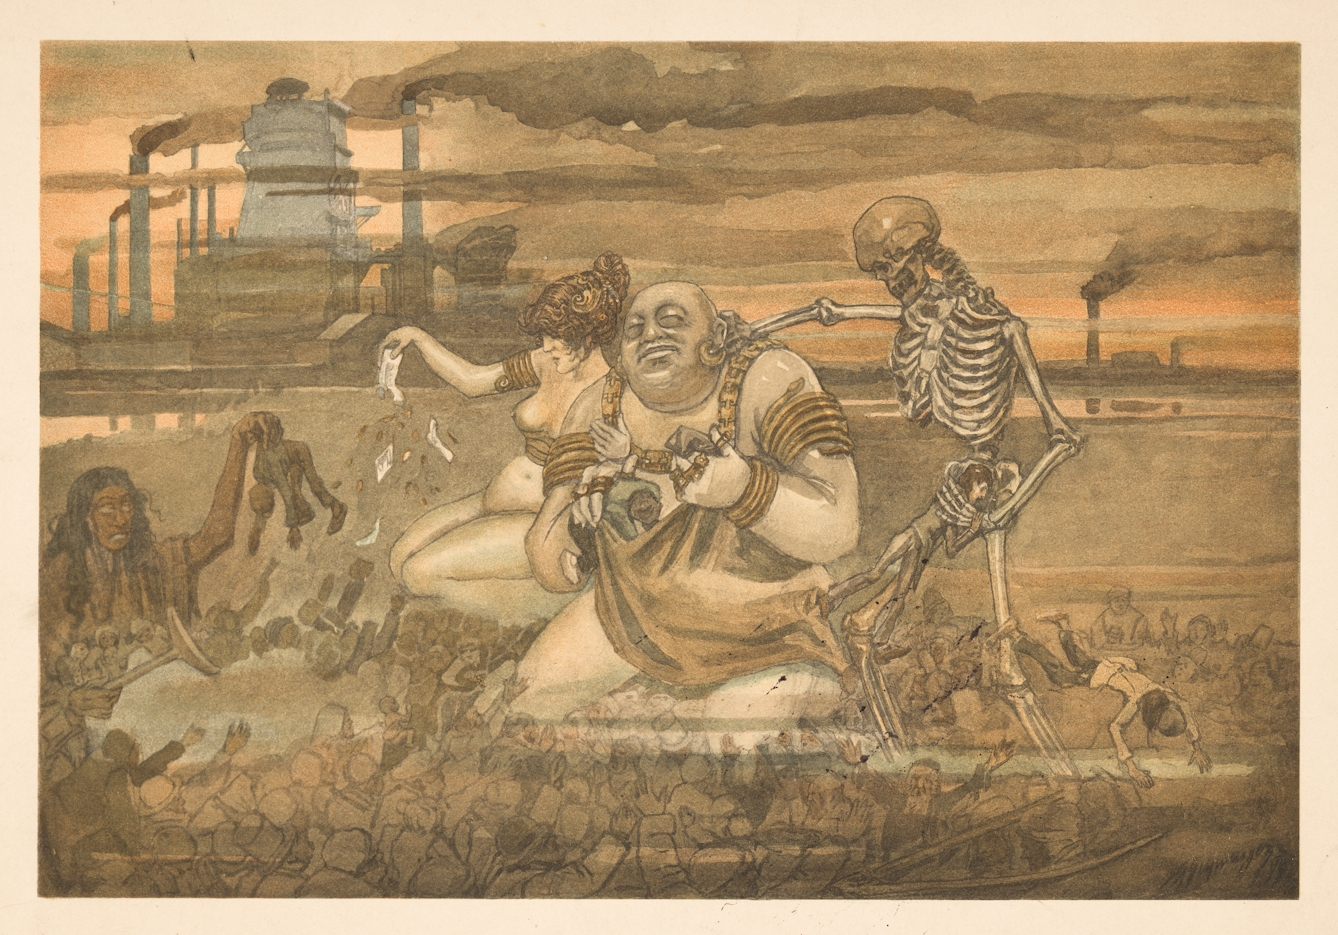 Watercolour painting of a semi naked man and woman kneeling in dirt next to a skeleton. Factory chimneys billowing smoke are in the background.